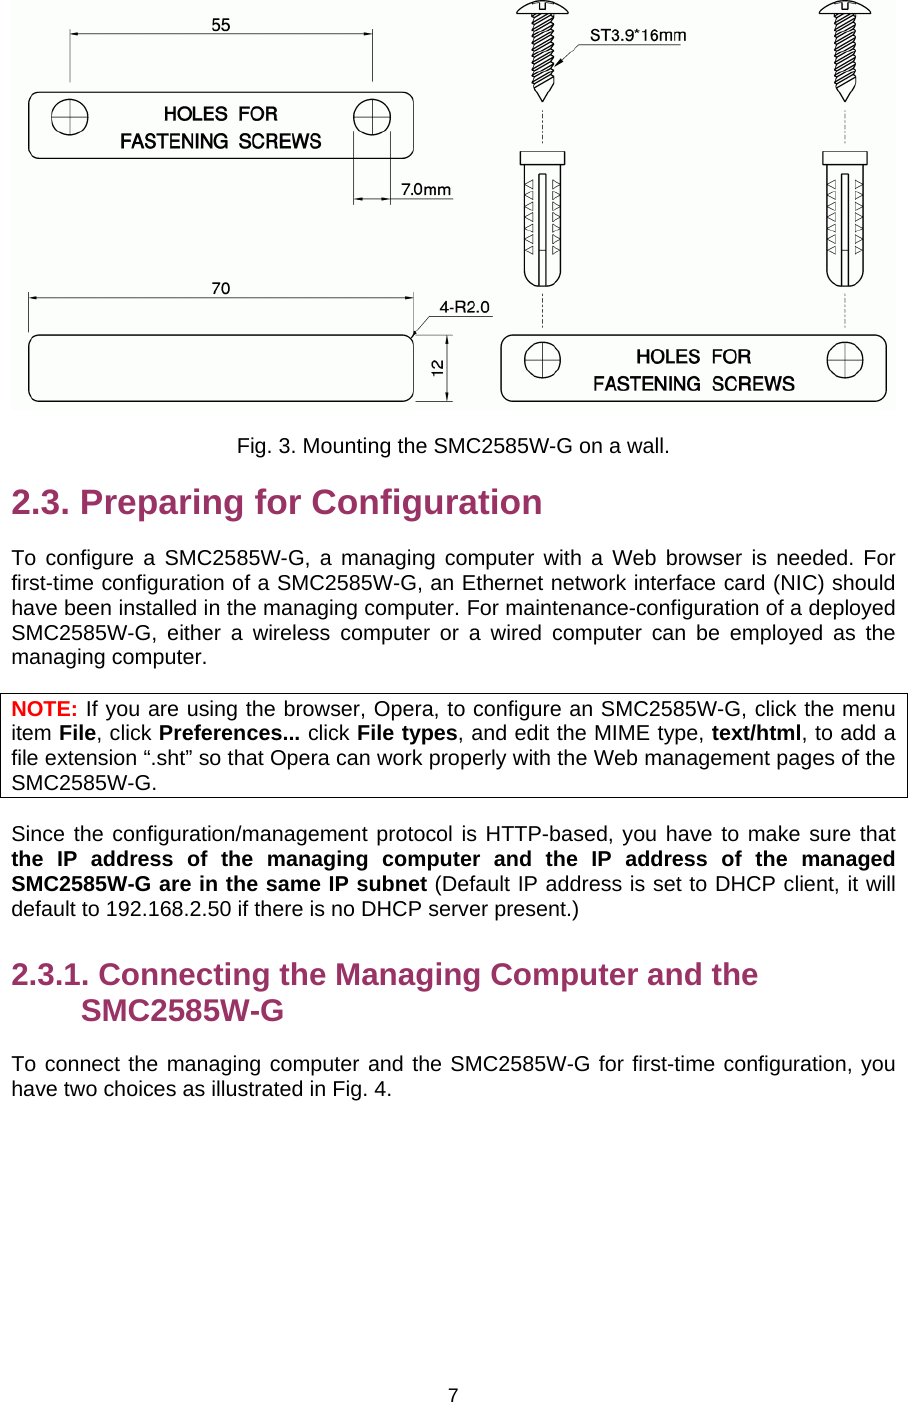   7 Fig. 3. Mounting the SMC2585W-G on a wall. 2.3. Preparing for Configuration To configure a SMC2585W-G, a managing computer with a Web browser is needed. For first-time configuration of a SMC2585W-G, an Ethernet network interface card (NIC) should have been installed in the managing computer. For maintenance-configuration of a deployed SMC2585W-G, either a wireless computer or a wired computer can be employed as the managing computer. NOTE: If you are using the browser, Opera, to configure an SMC2585W-G, click the menu item File, click Preferences... click File types, and edit the MIME type, text/html, to add a file extension “.sht” so that Opera can work properly with the Web management pages of the SMC2585W-G. Since the configuration/management protocol is HTTP-based, you have to make sure that the IP address of the managing computer and the IP address of the managed SMC2585W-G are in the same IP subnet (Default IP address is set to DHCP client, it will default to 192.168.2.50 if there is no DHCP server present.) 2.3.1. Connecting the Managing Computer and the SMC2585W-G To connect the managing computer and the SMC2585W-G for first-time configuration, you have two choices as illustrated in Fig. 4. 